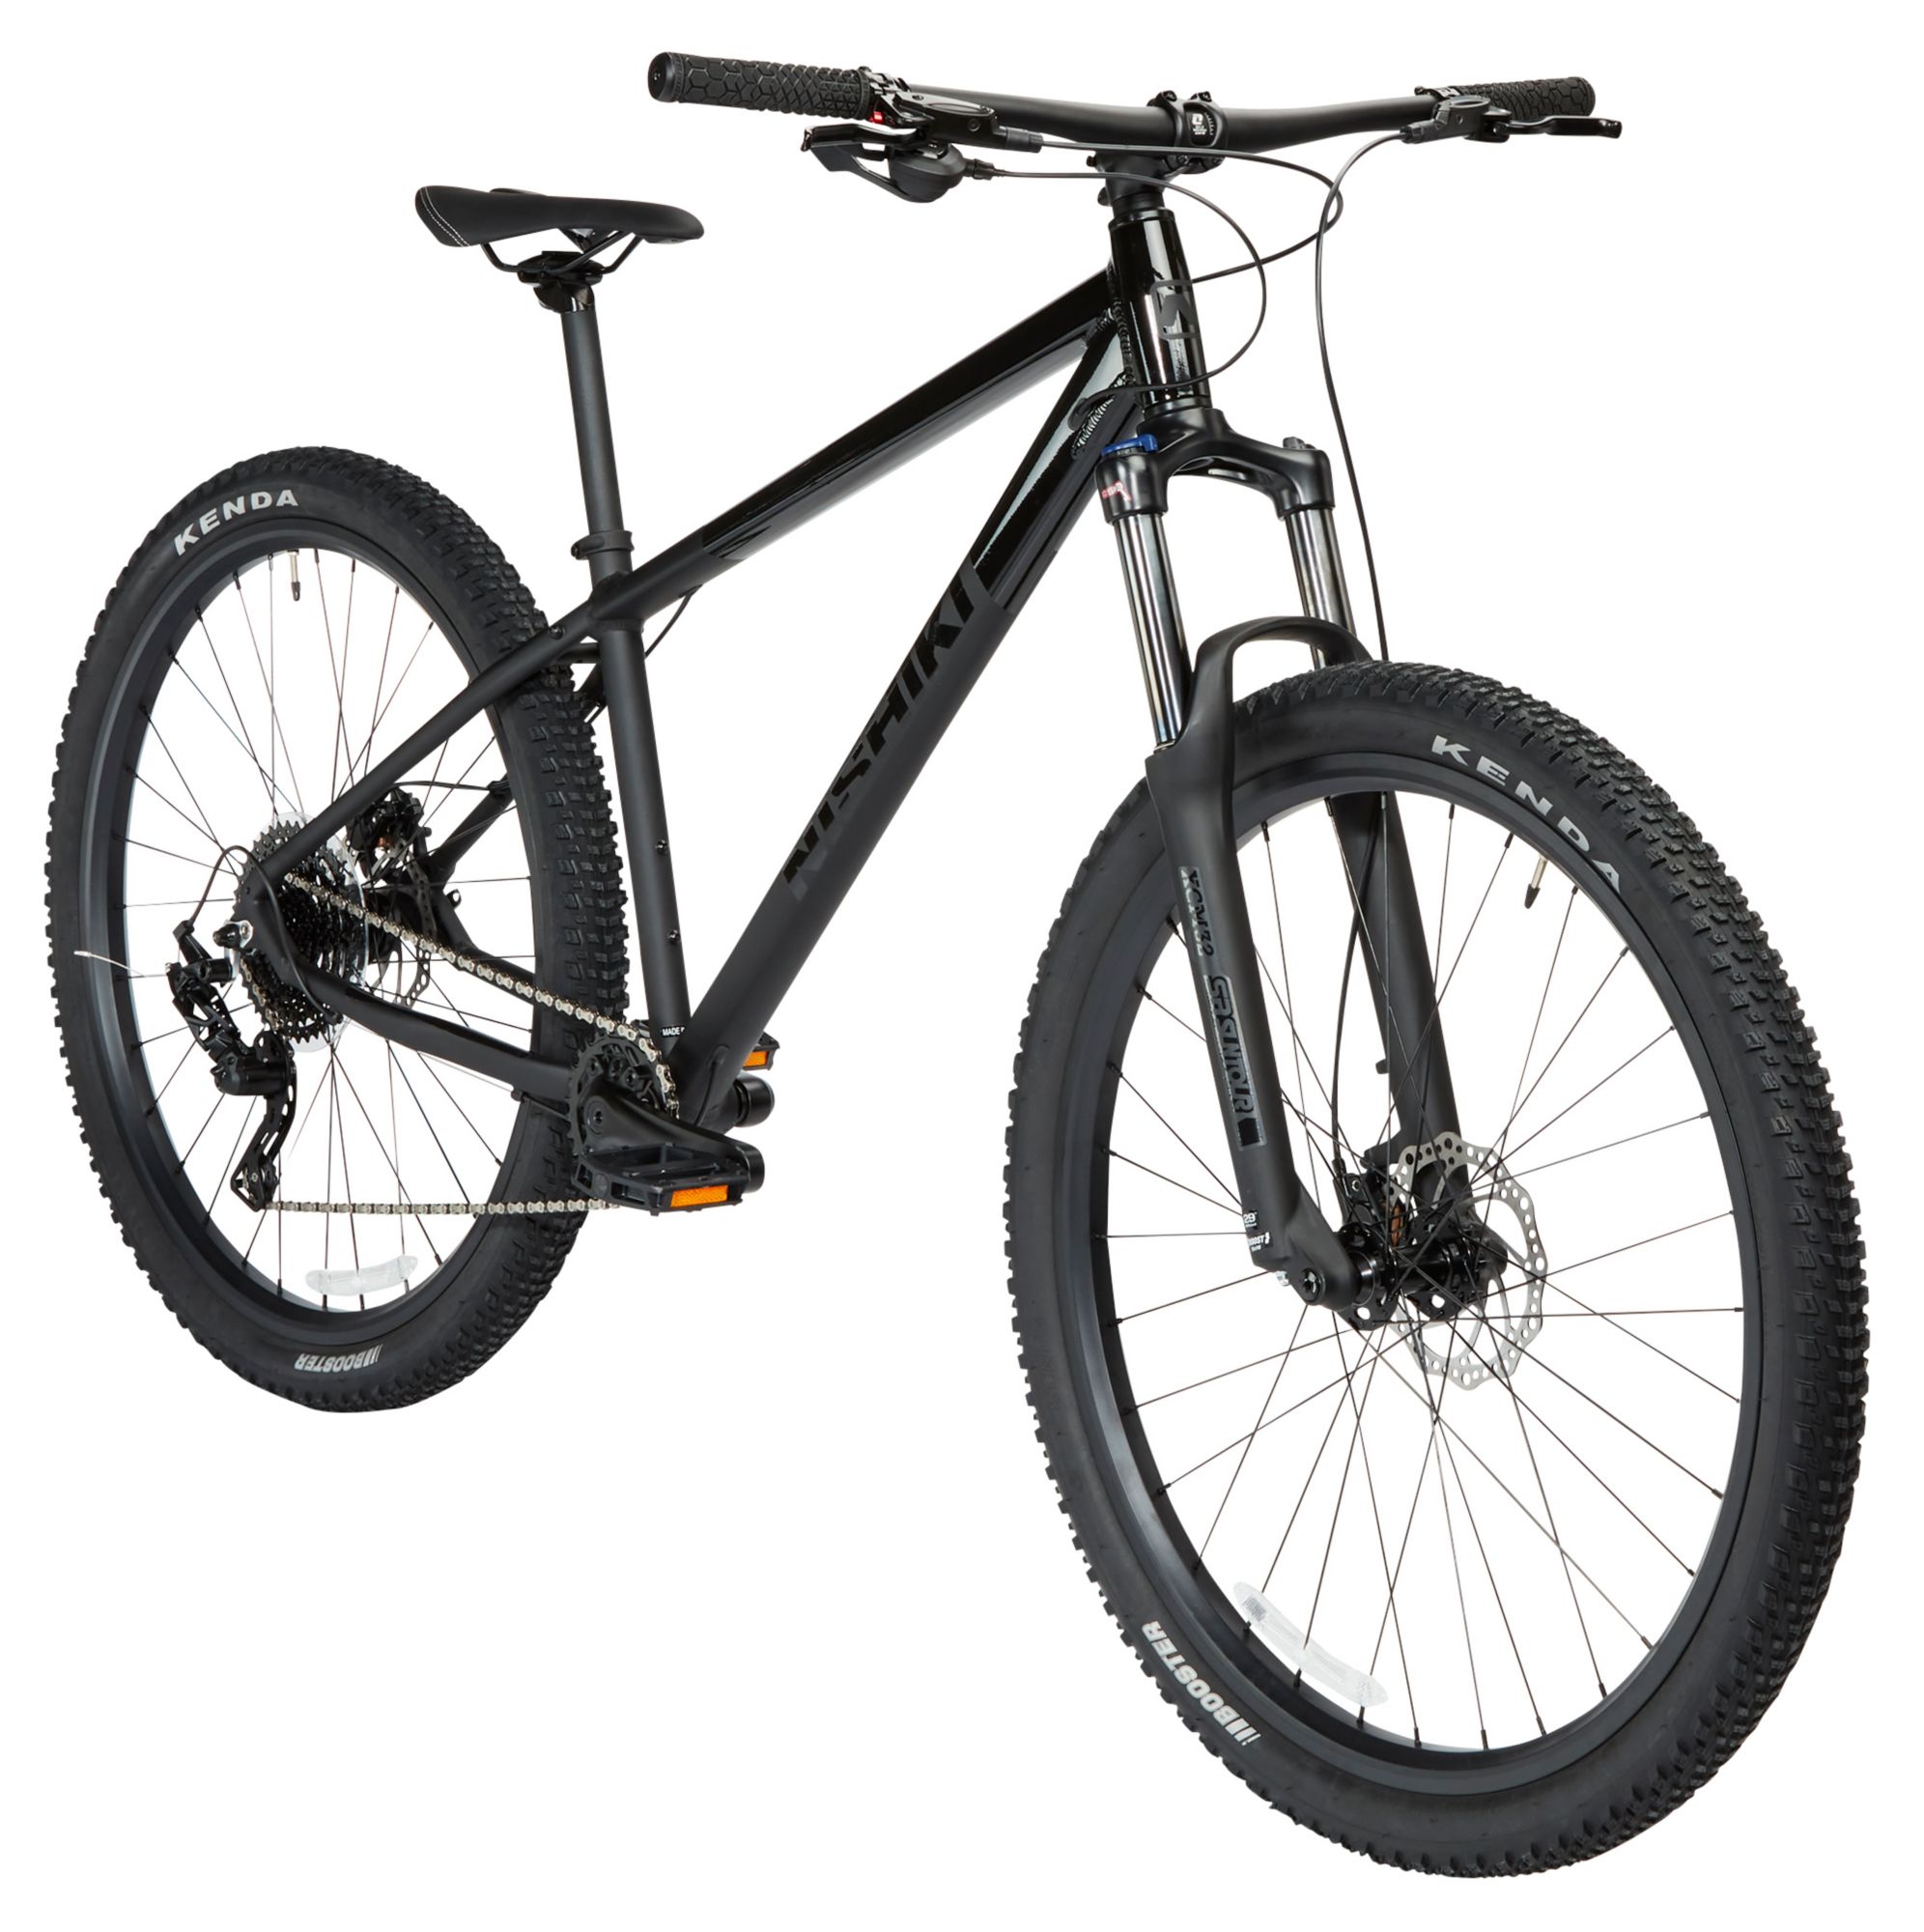 Fuji Tahoe 29 Comp reviews and prices - 29er bikes